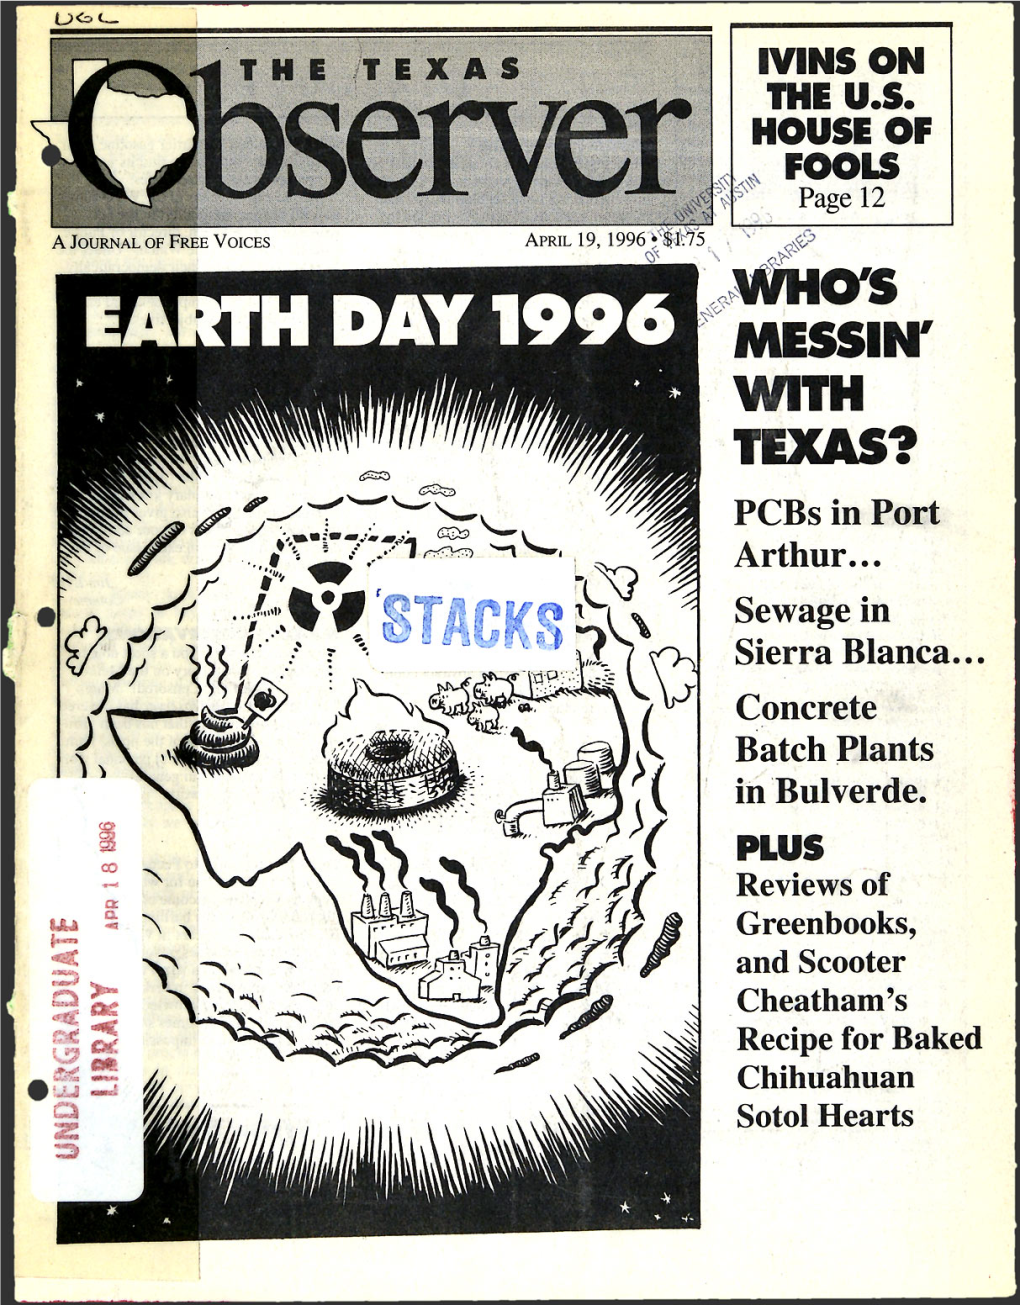 Earth Day 1996 Messin' with Texas?